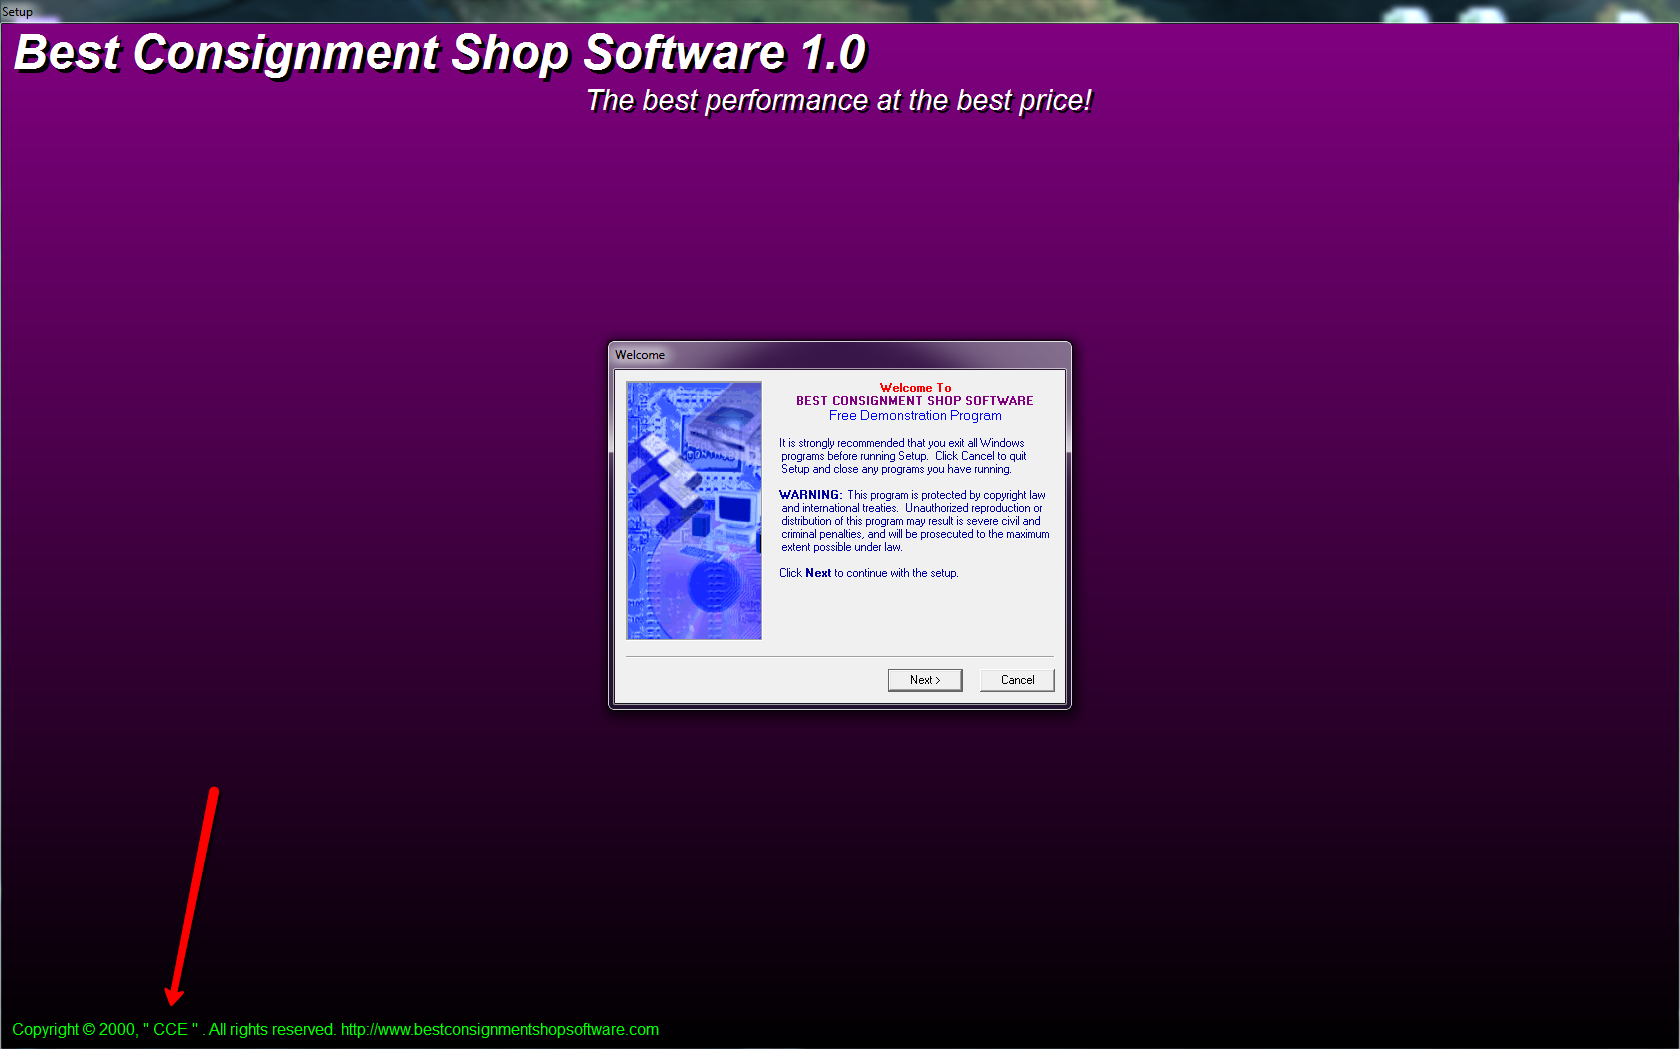 Best Consignment Shop Software